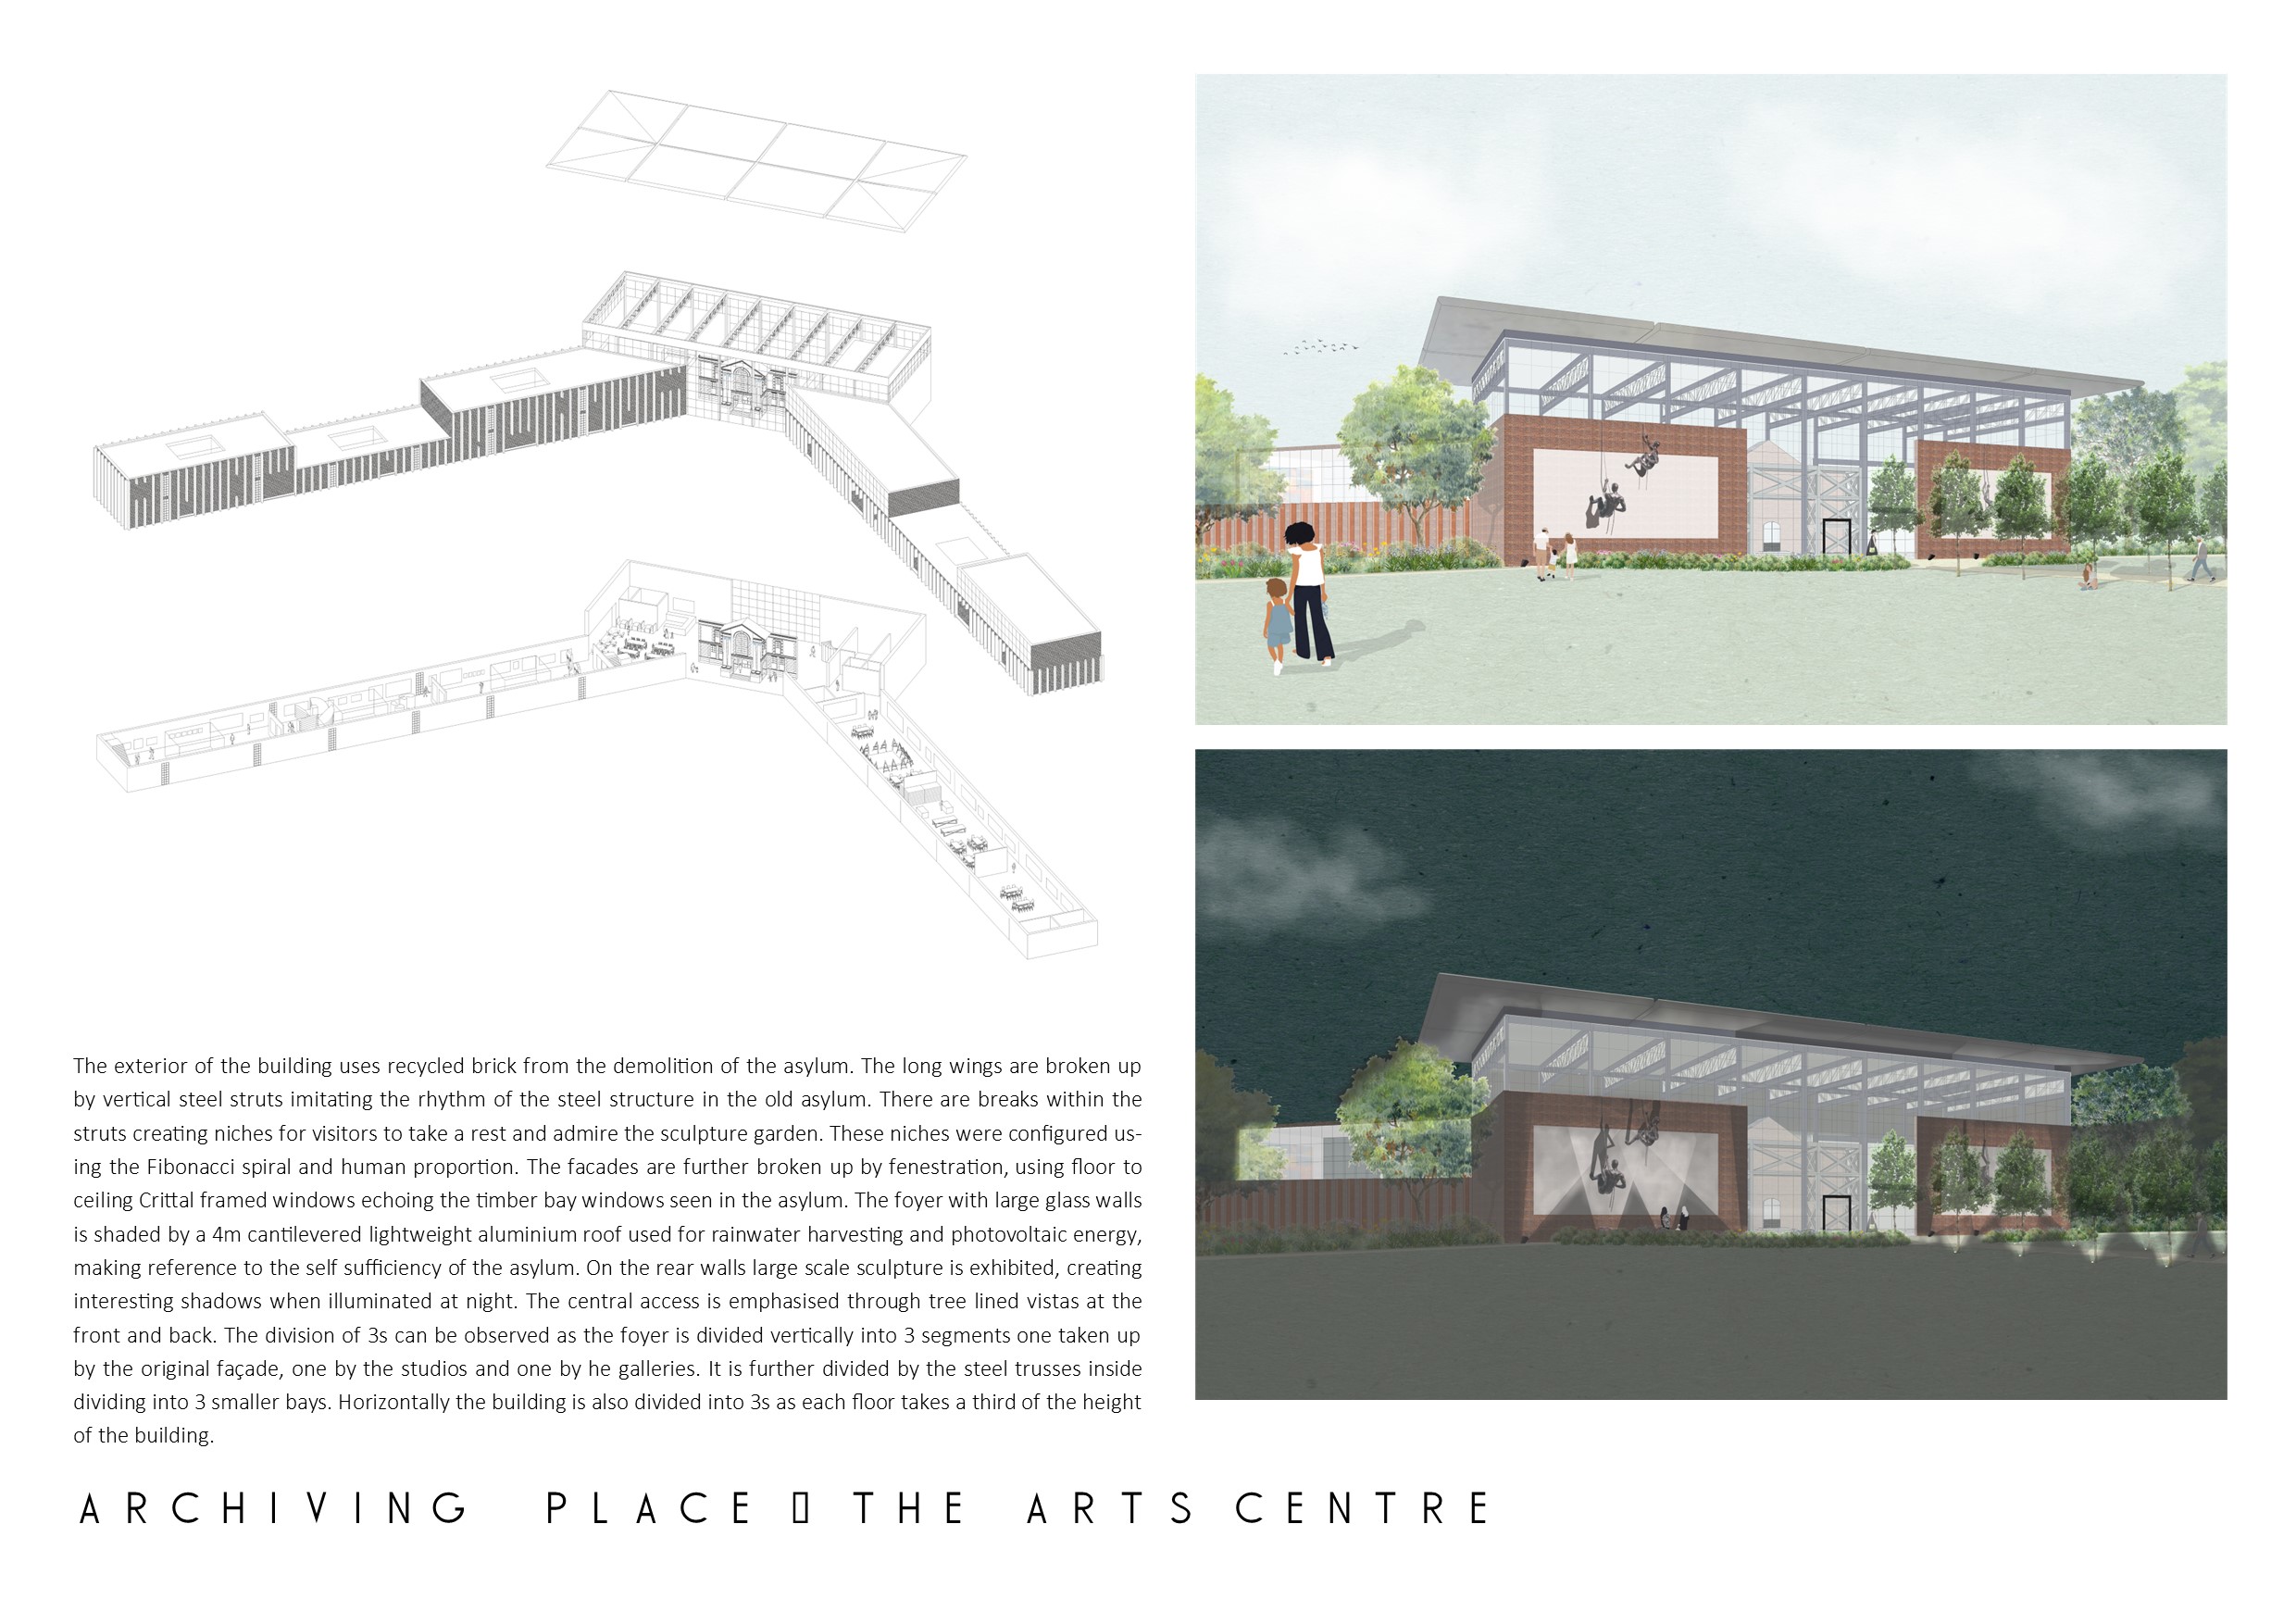 Portfolio Page of  an axonometric drawing of the arts centre and a day and night perspective of the buiding. The perspectives show the facades that use recycled brick from the demolition of the asylum.